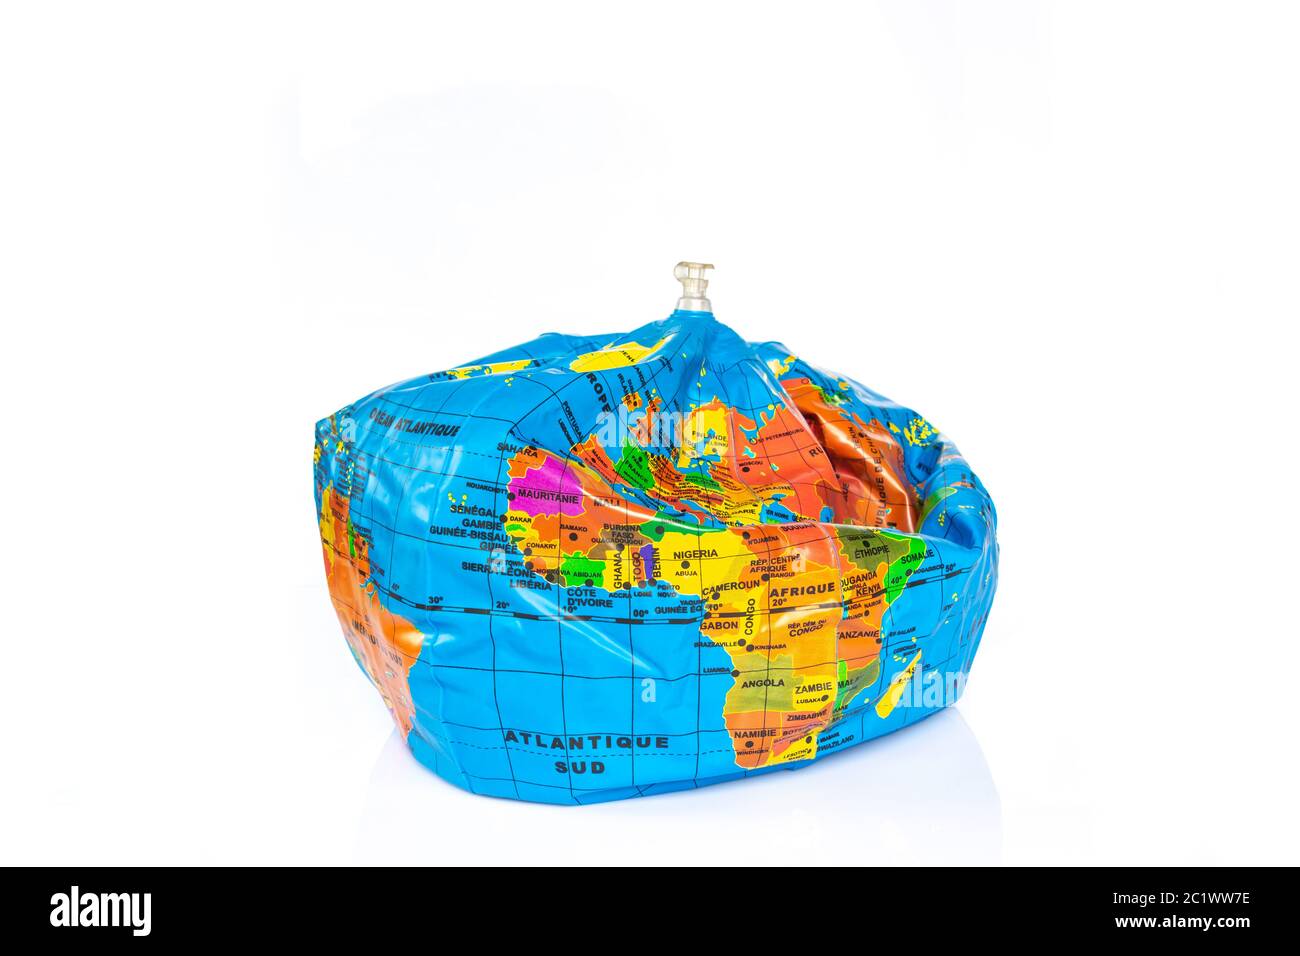 Planet earth toy balloon deflated isolated on white background. Earth overshoot day, unsustainable resources consumption concept Stock Photo